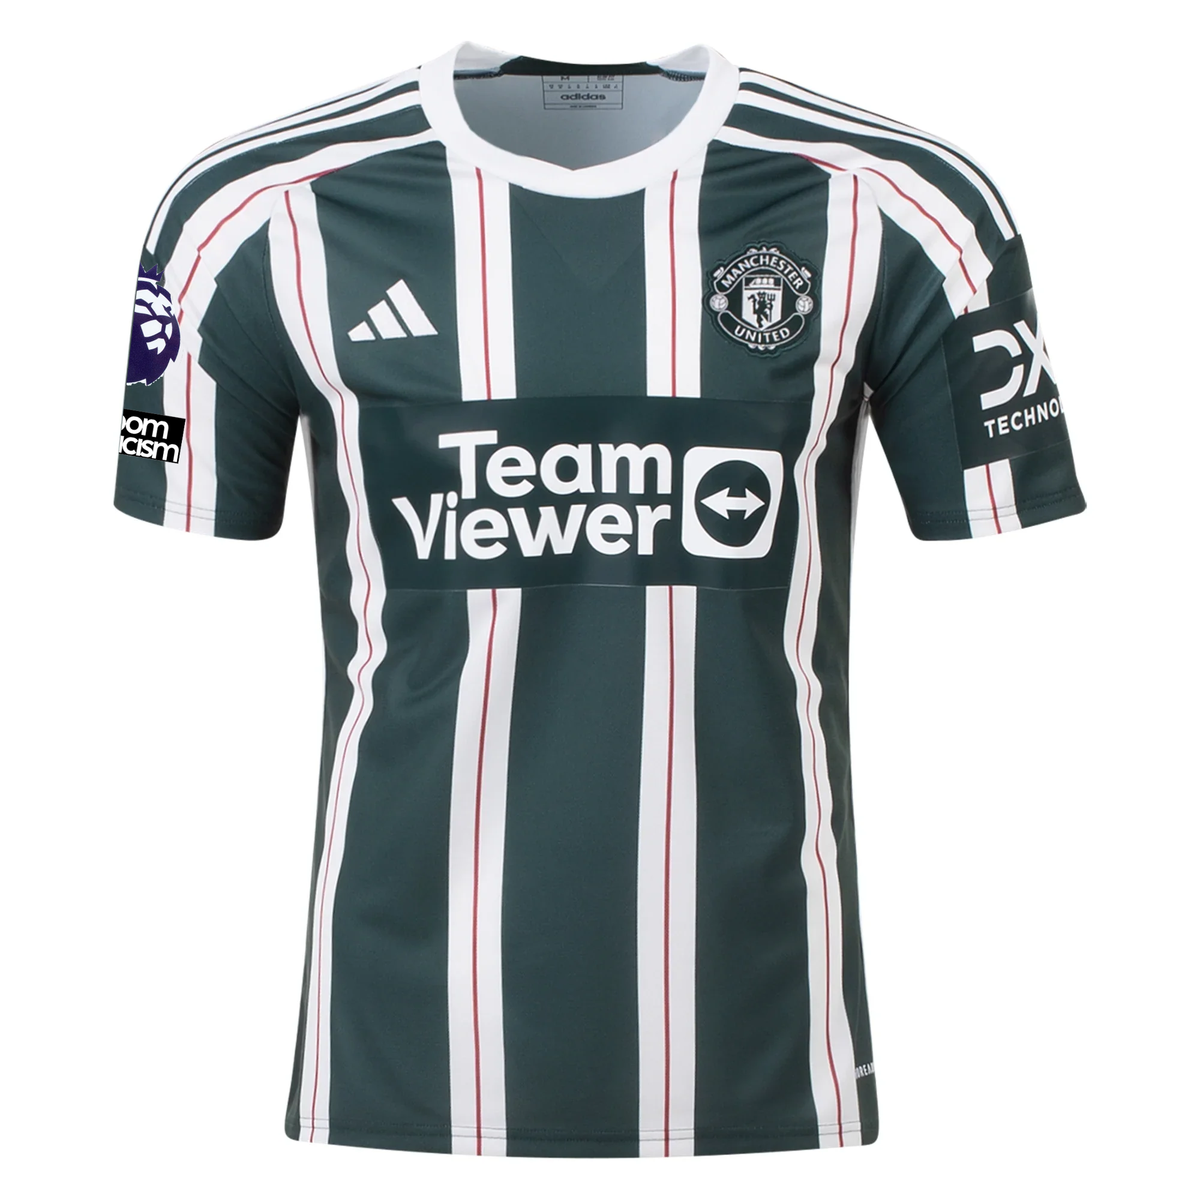 adidas Manchester United Facundo Pellestri Away Jersey w/ EPL + No Room For Racism Patches 23/24 (Green Night/Core White)